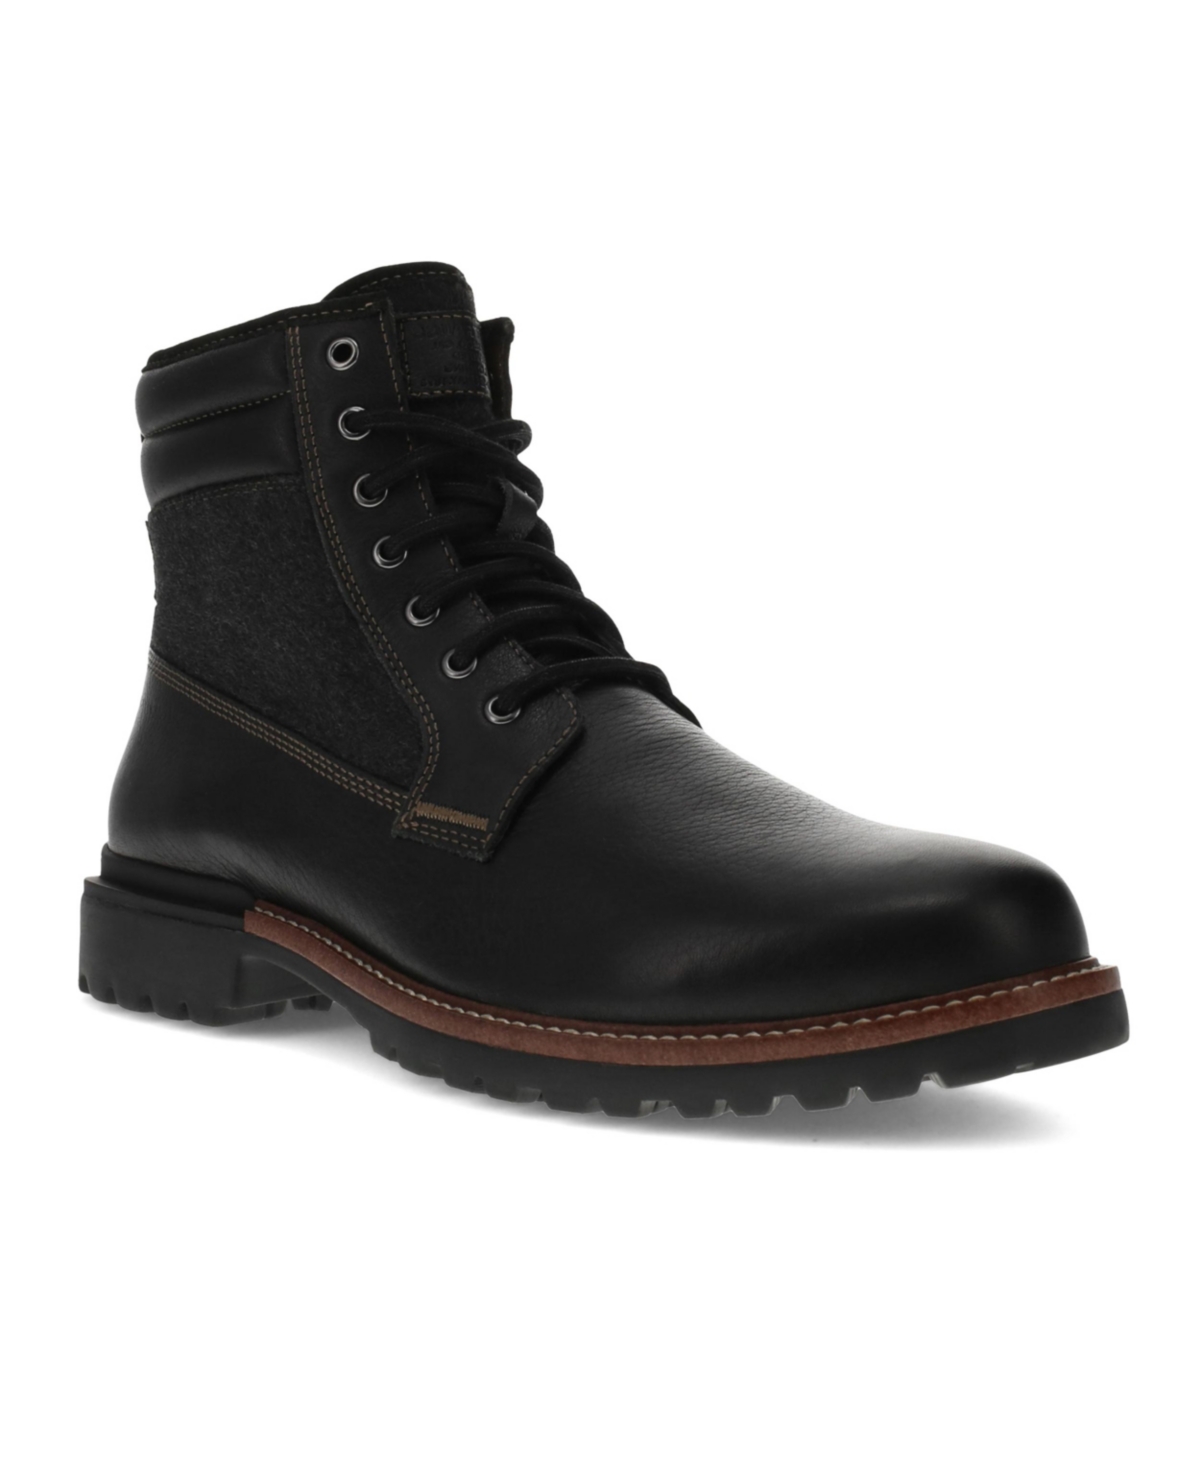 Levi's Men's Cardiff Neo Lace-up Boots Men's Shoes In Black